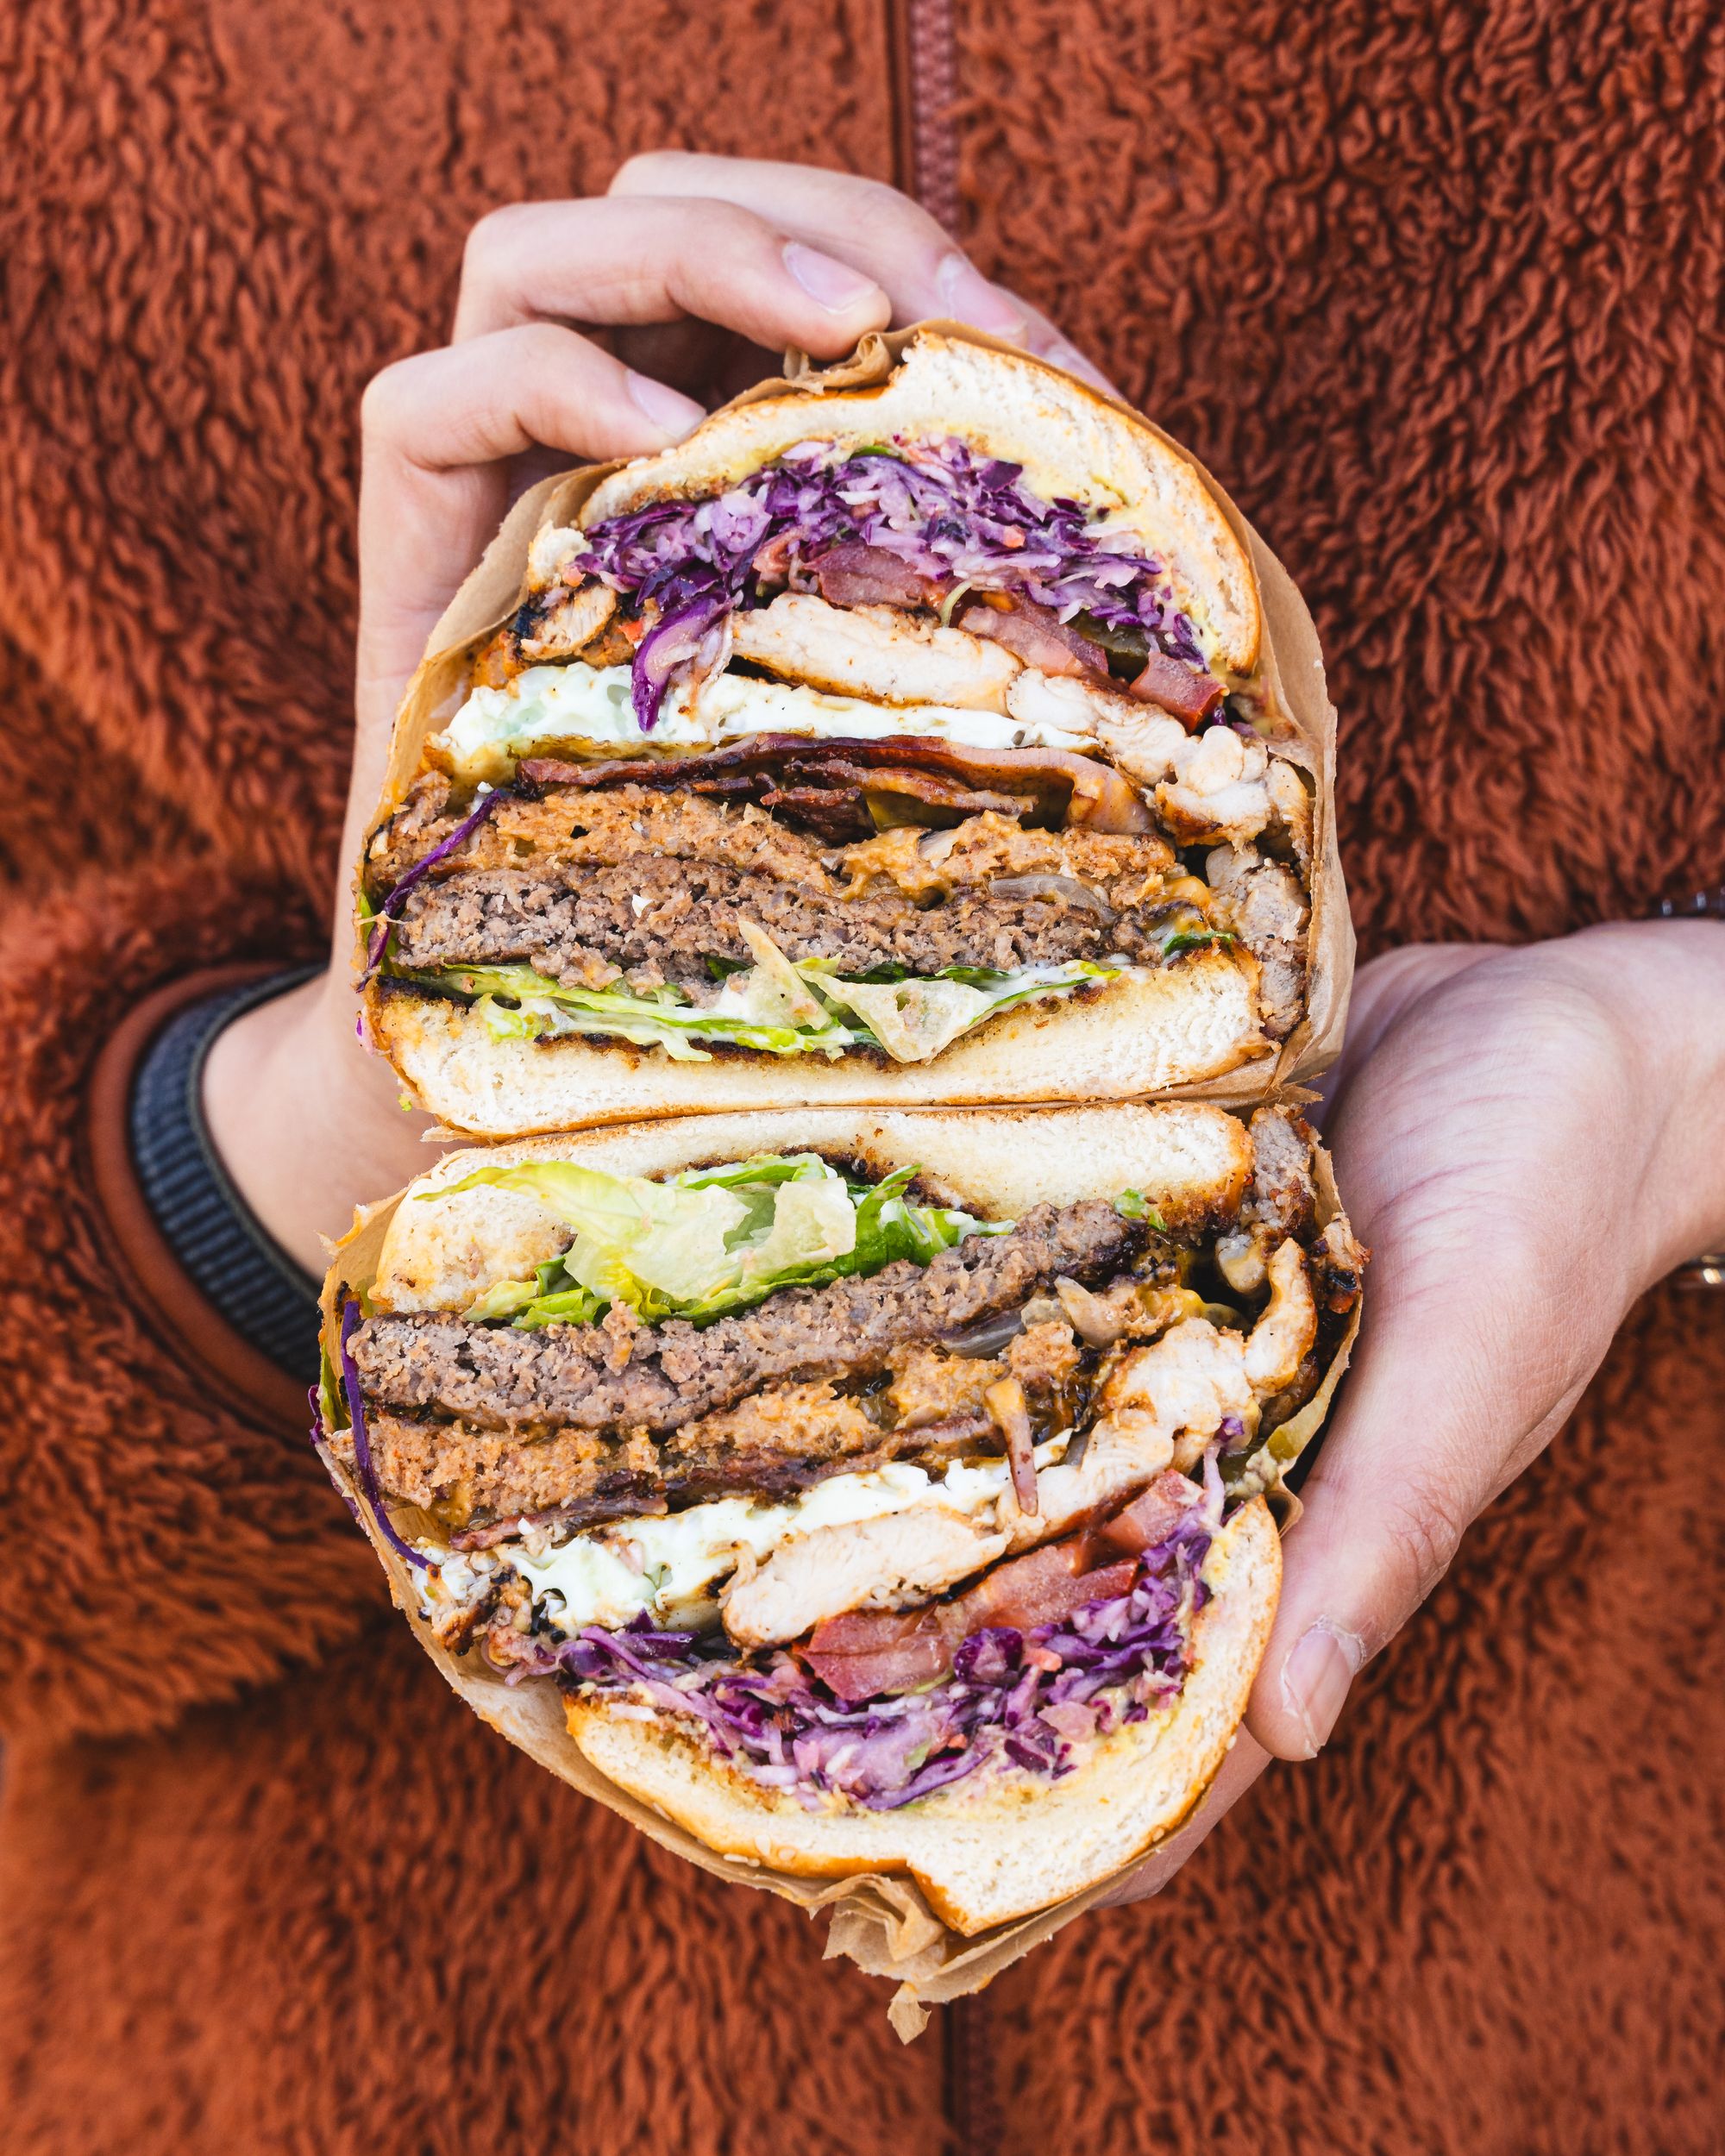 Hand holding a burger with lettuce, beef patty, grilled chicken, purple raddish and cheese